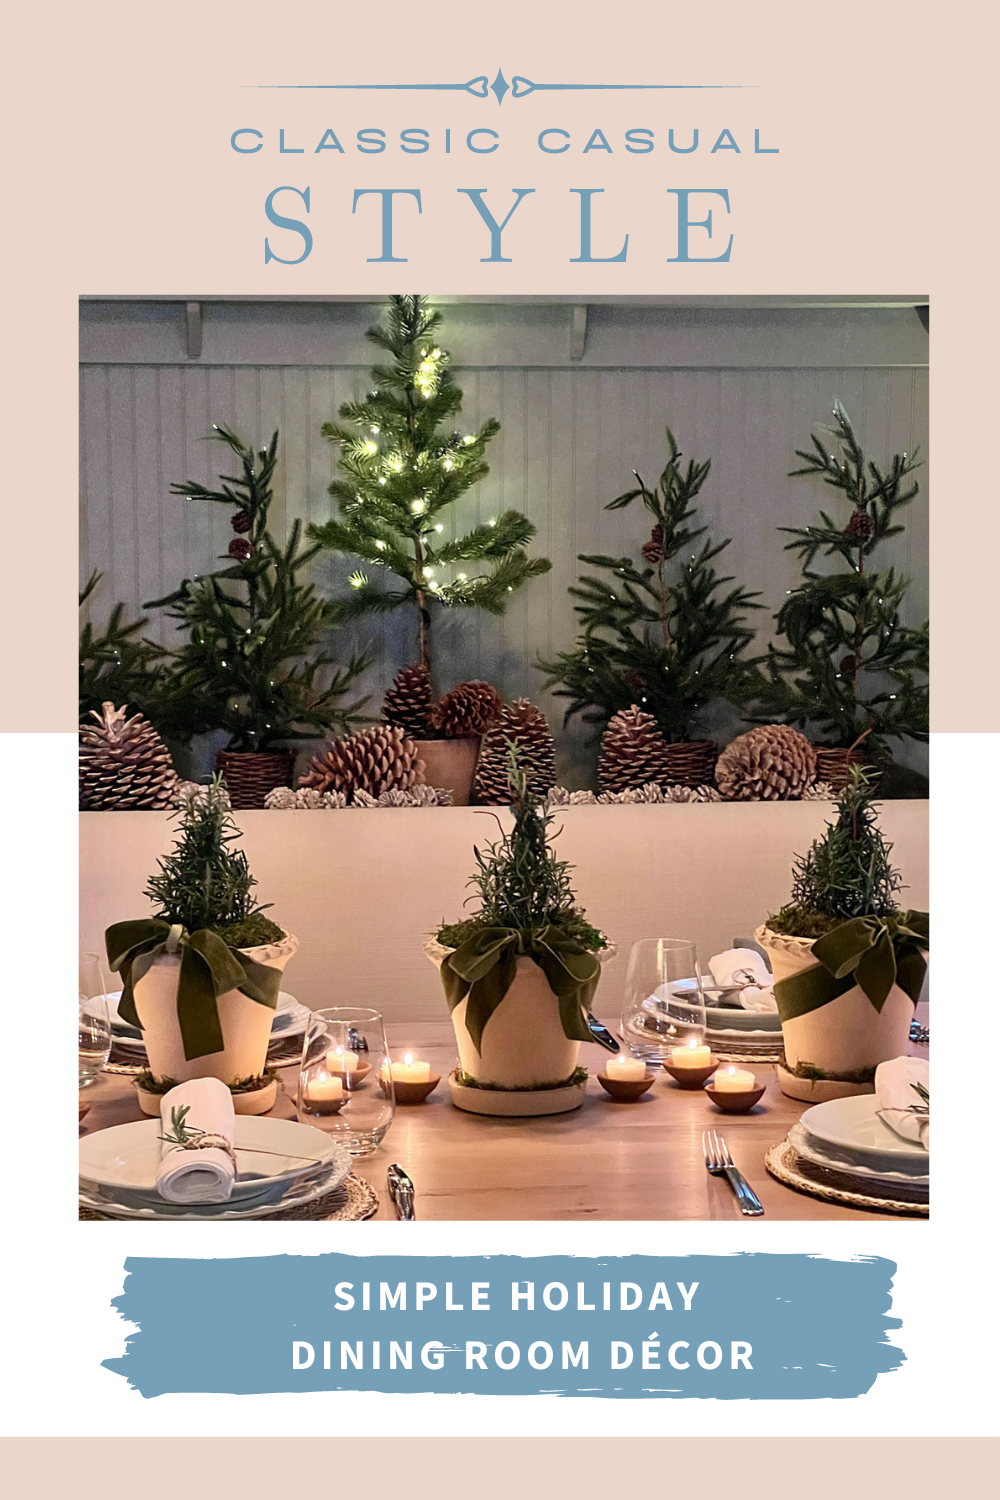 Green And White Christmas In The Dining Room with terracotta votives